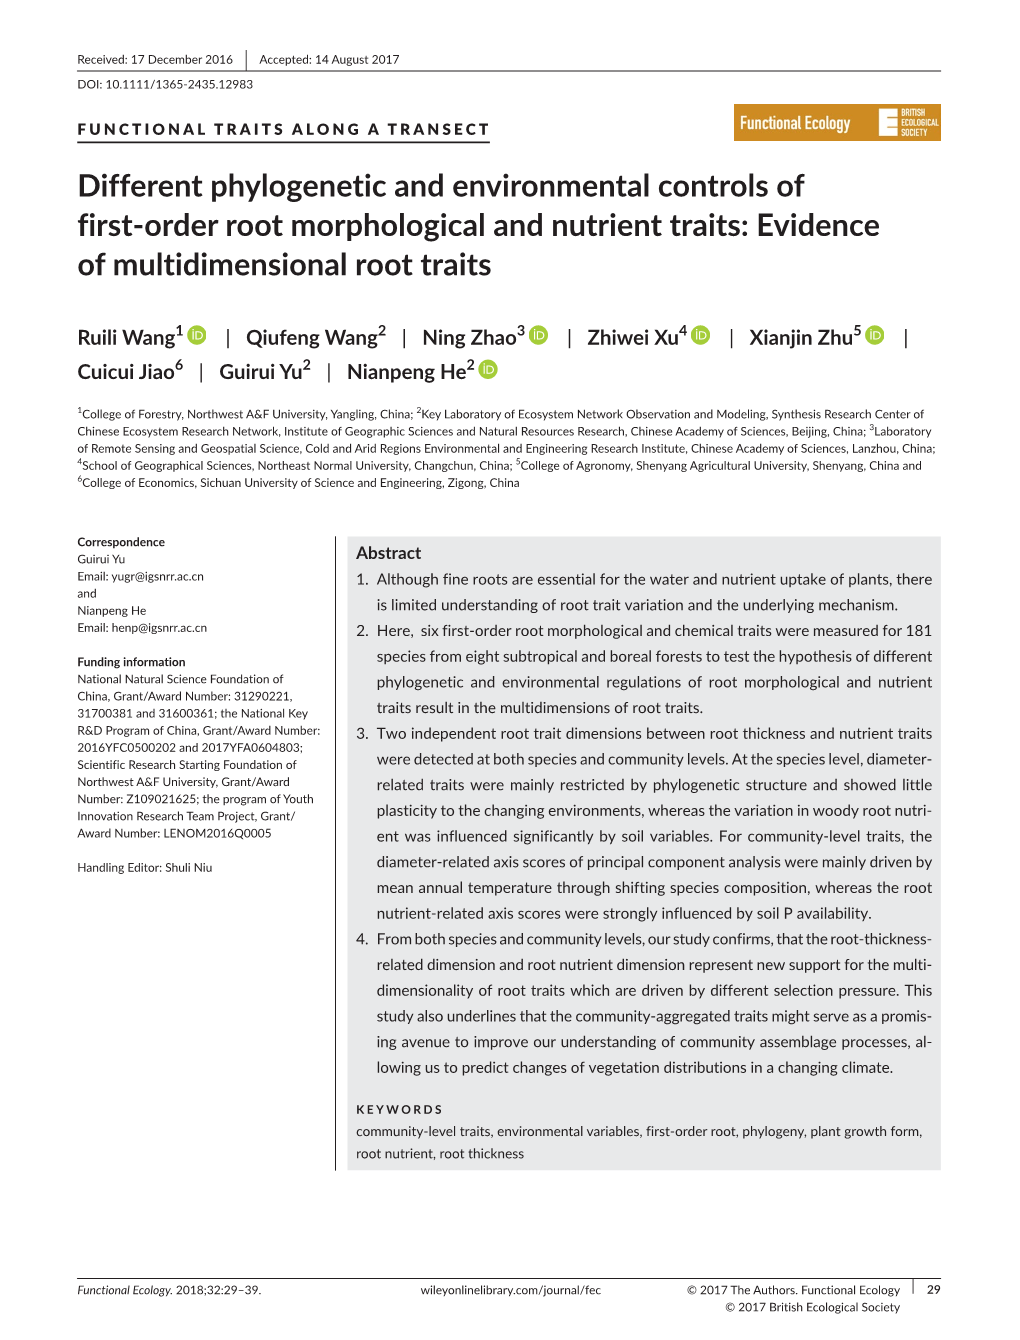 Different Phylogenetic and Environmental Controls of First‐Order